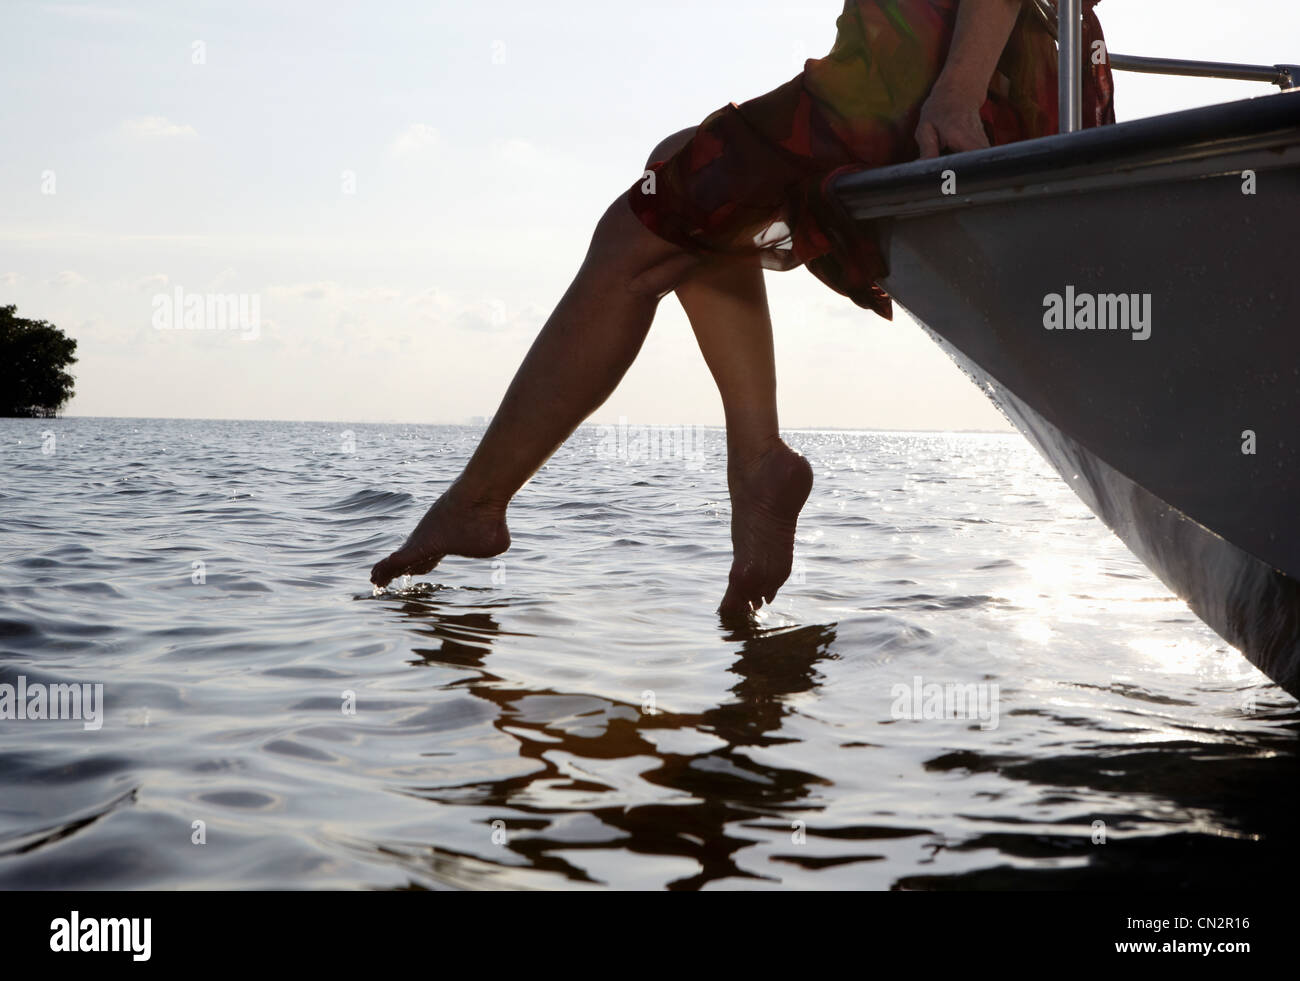 Senior woman sitting on edge of motorboat with feet in water Stock Photo